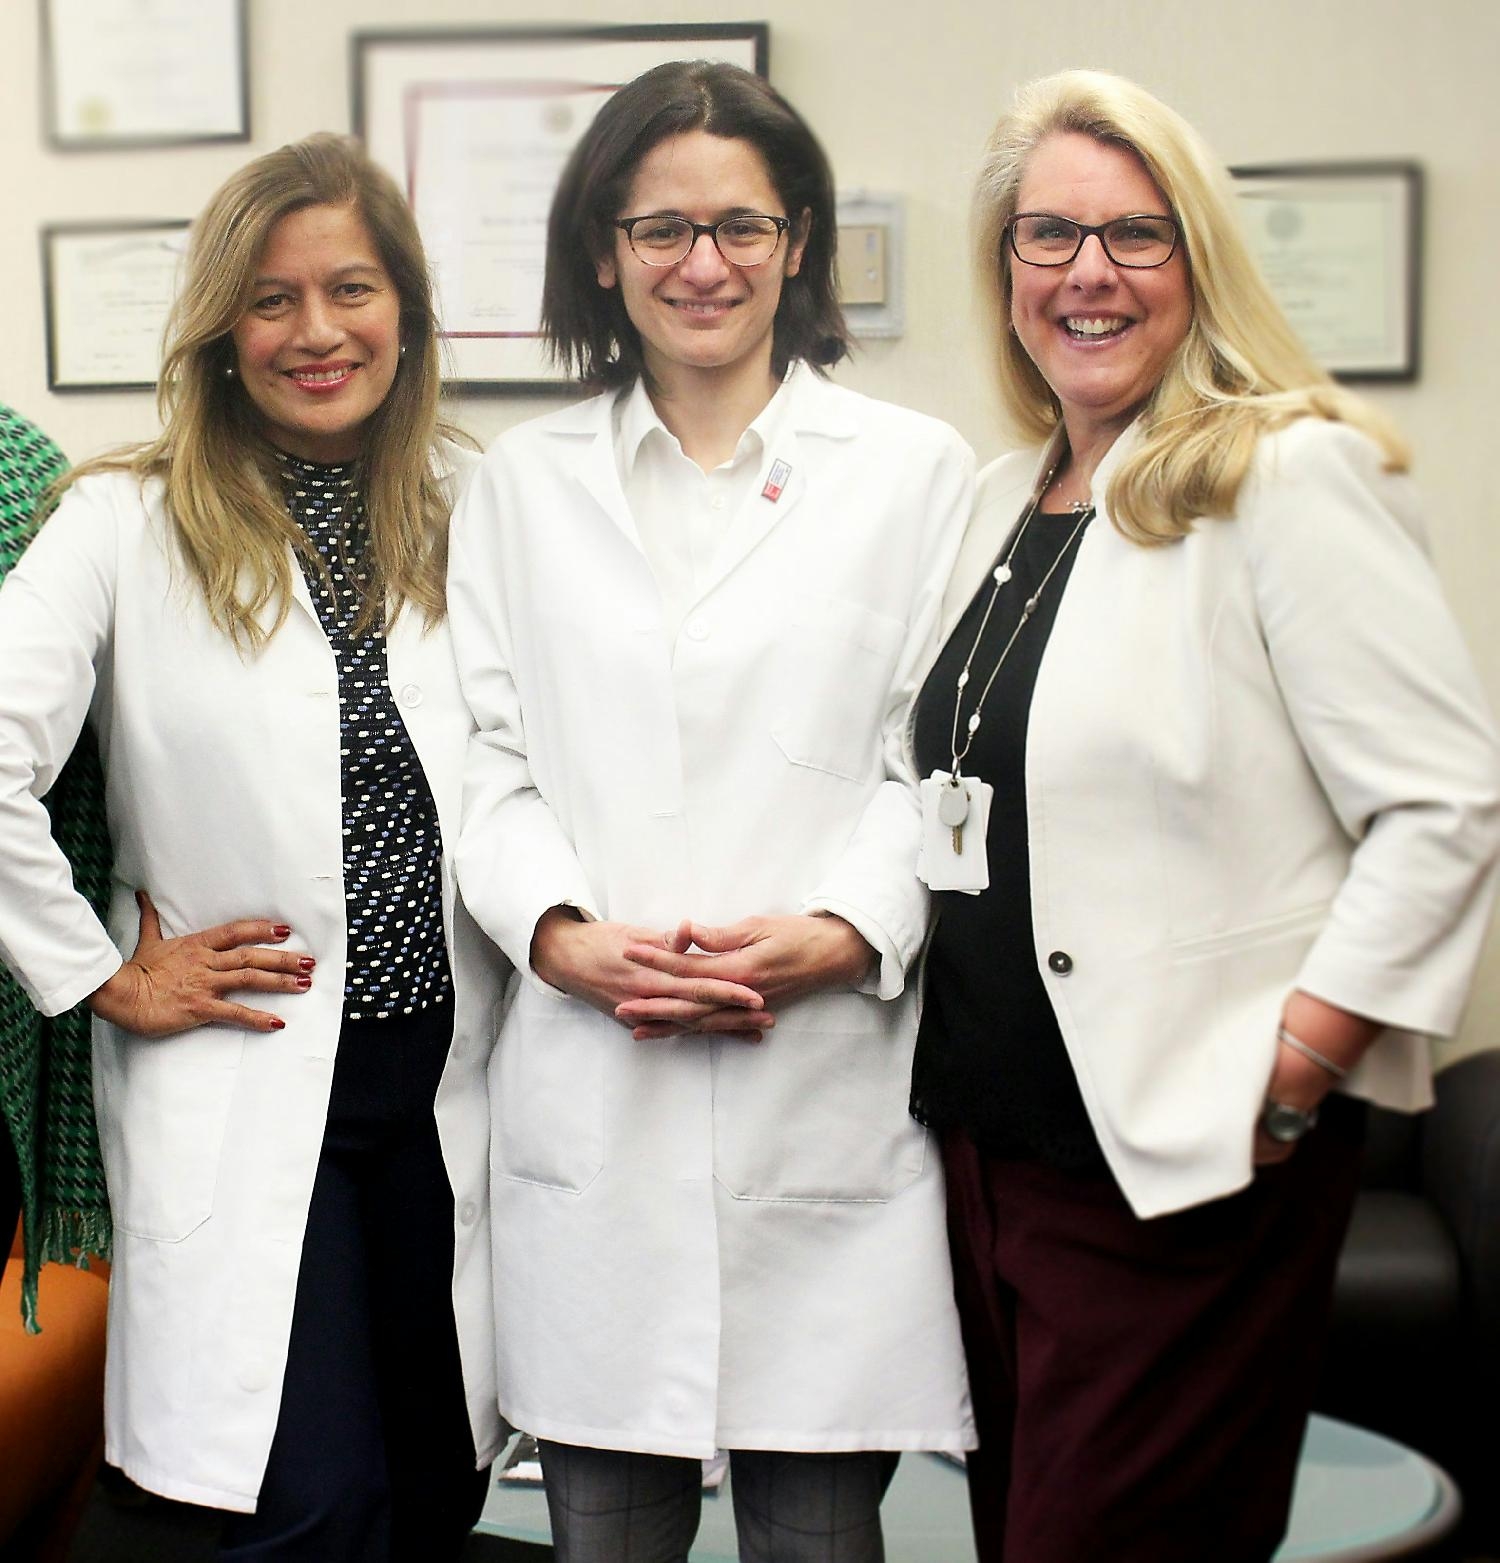 At Westmed, Women Lead the Way